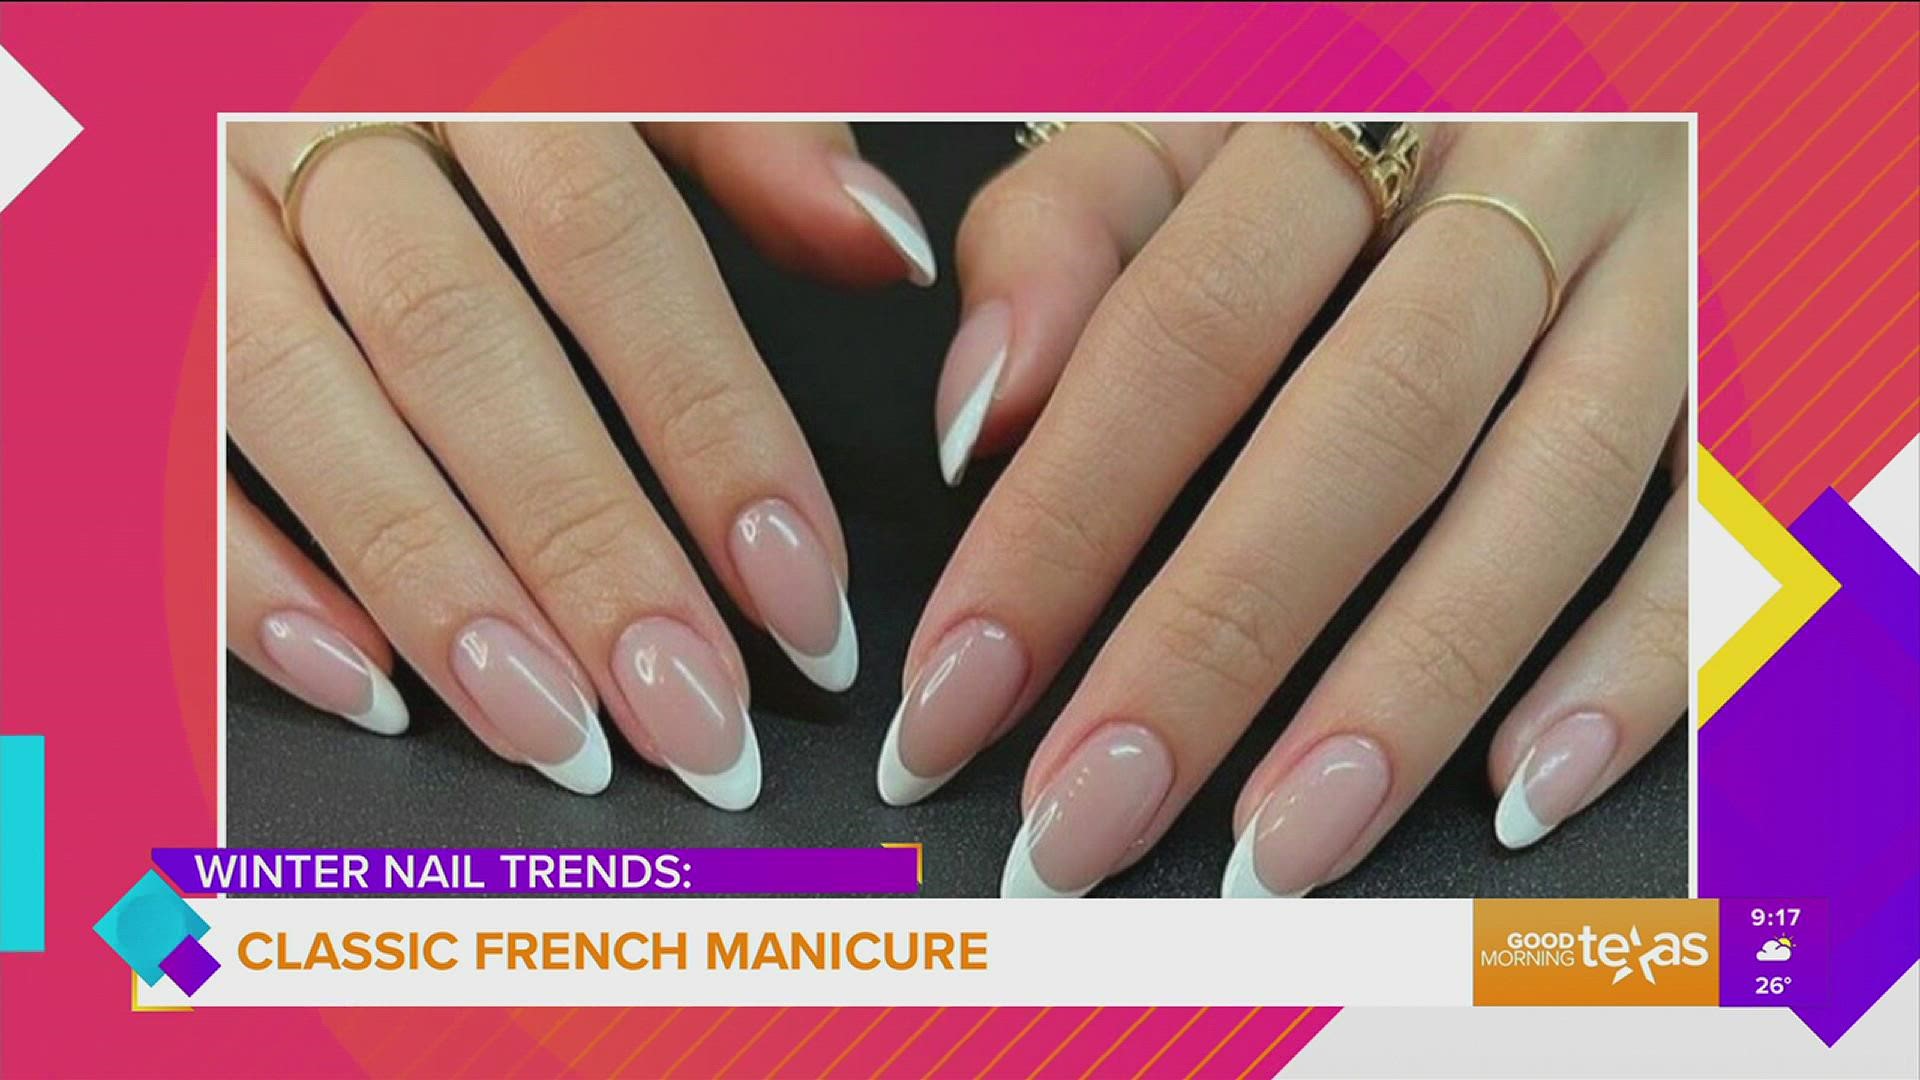 Mai Duong talks about how to take care of your nails this season.